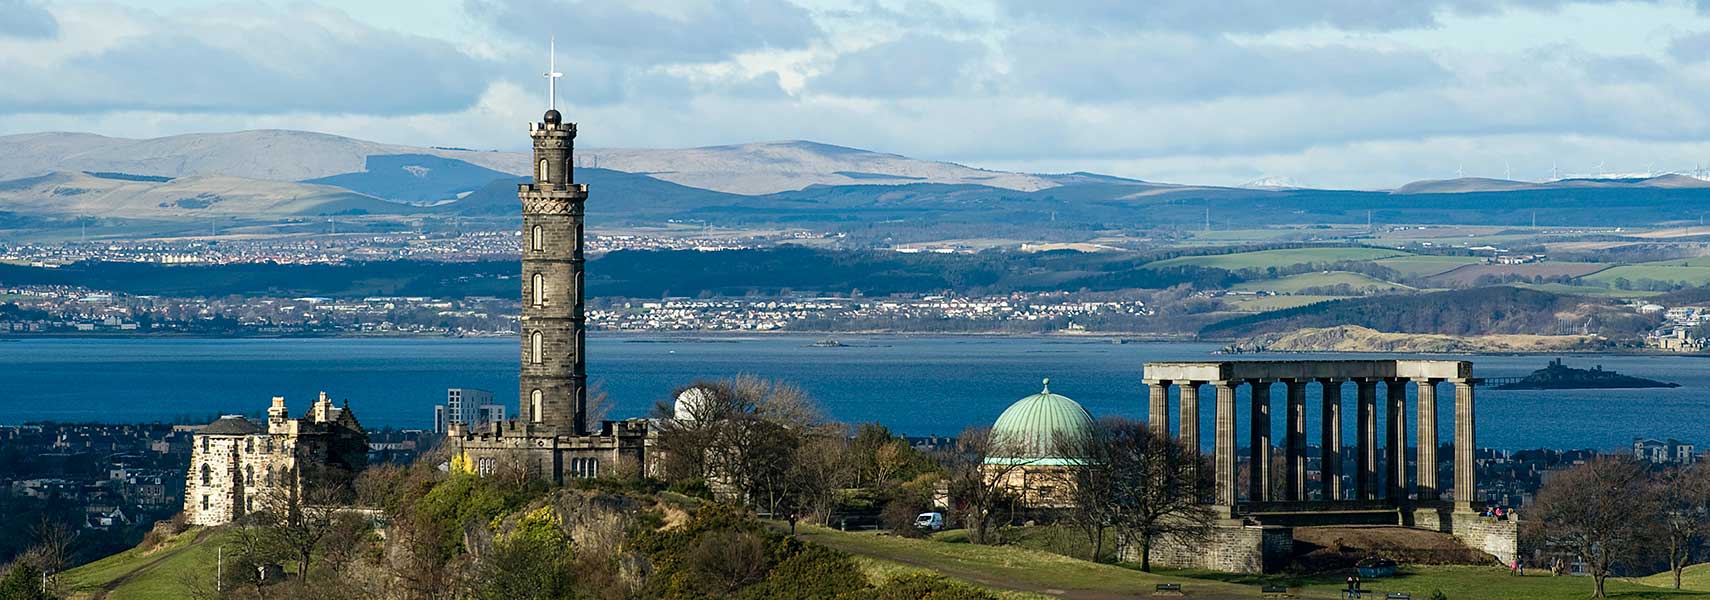 Calton Hill with the Old Observatory House, the Nelson Monument, the City Observatory, and the National Monument of Scotland, Edinburgh, Scotland, United Kingdom